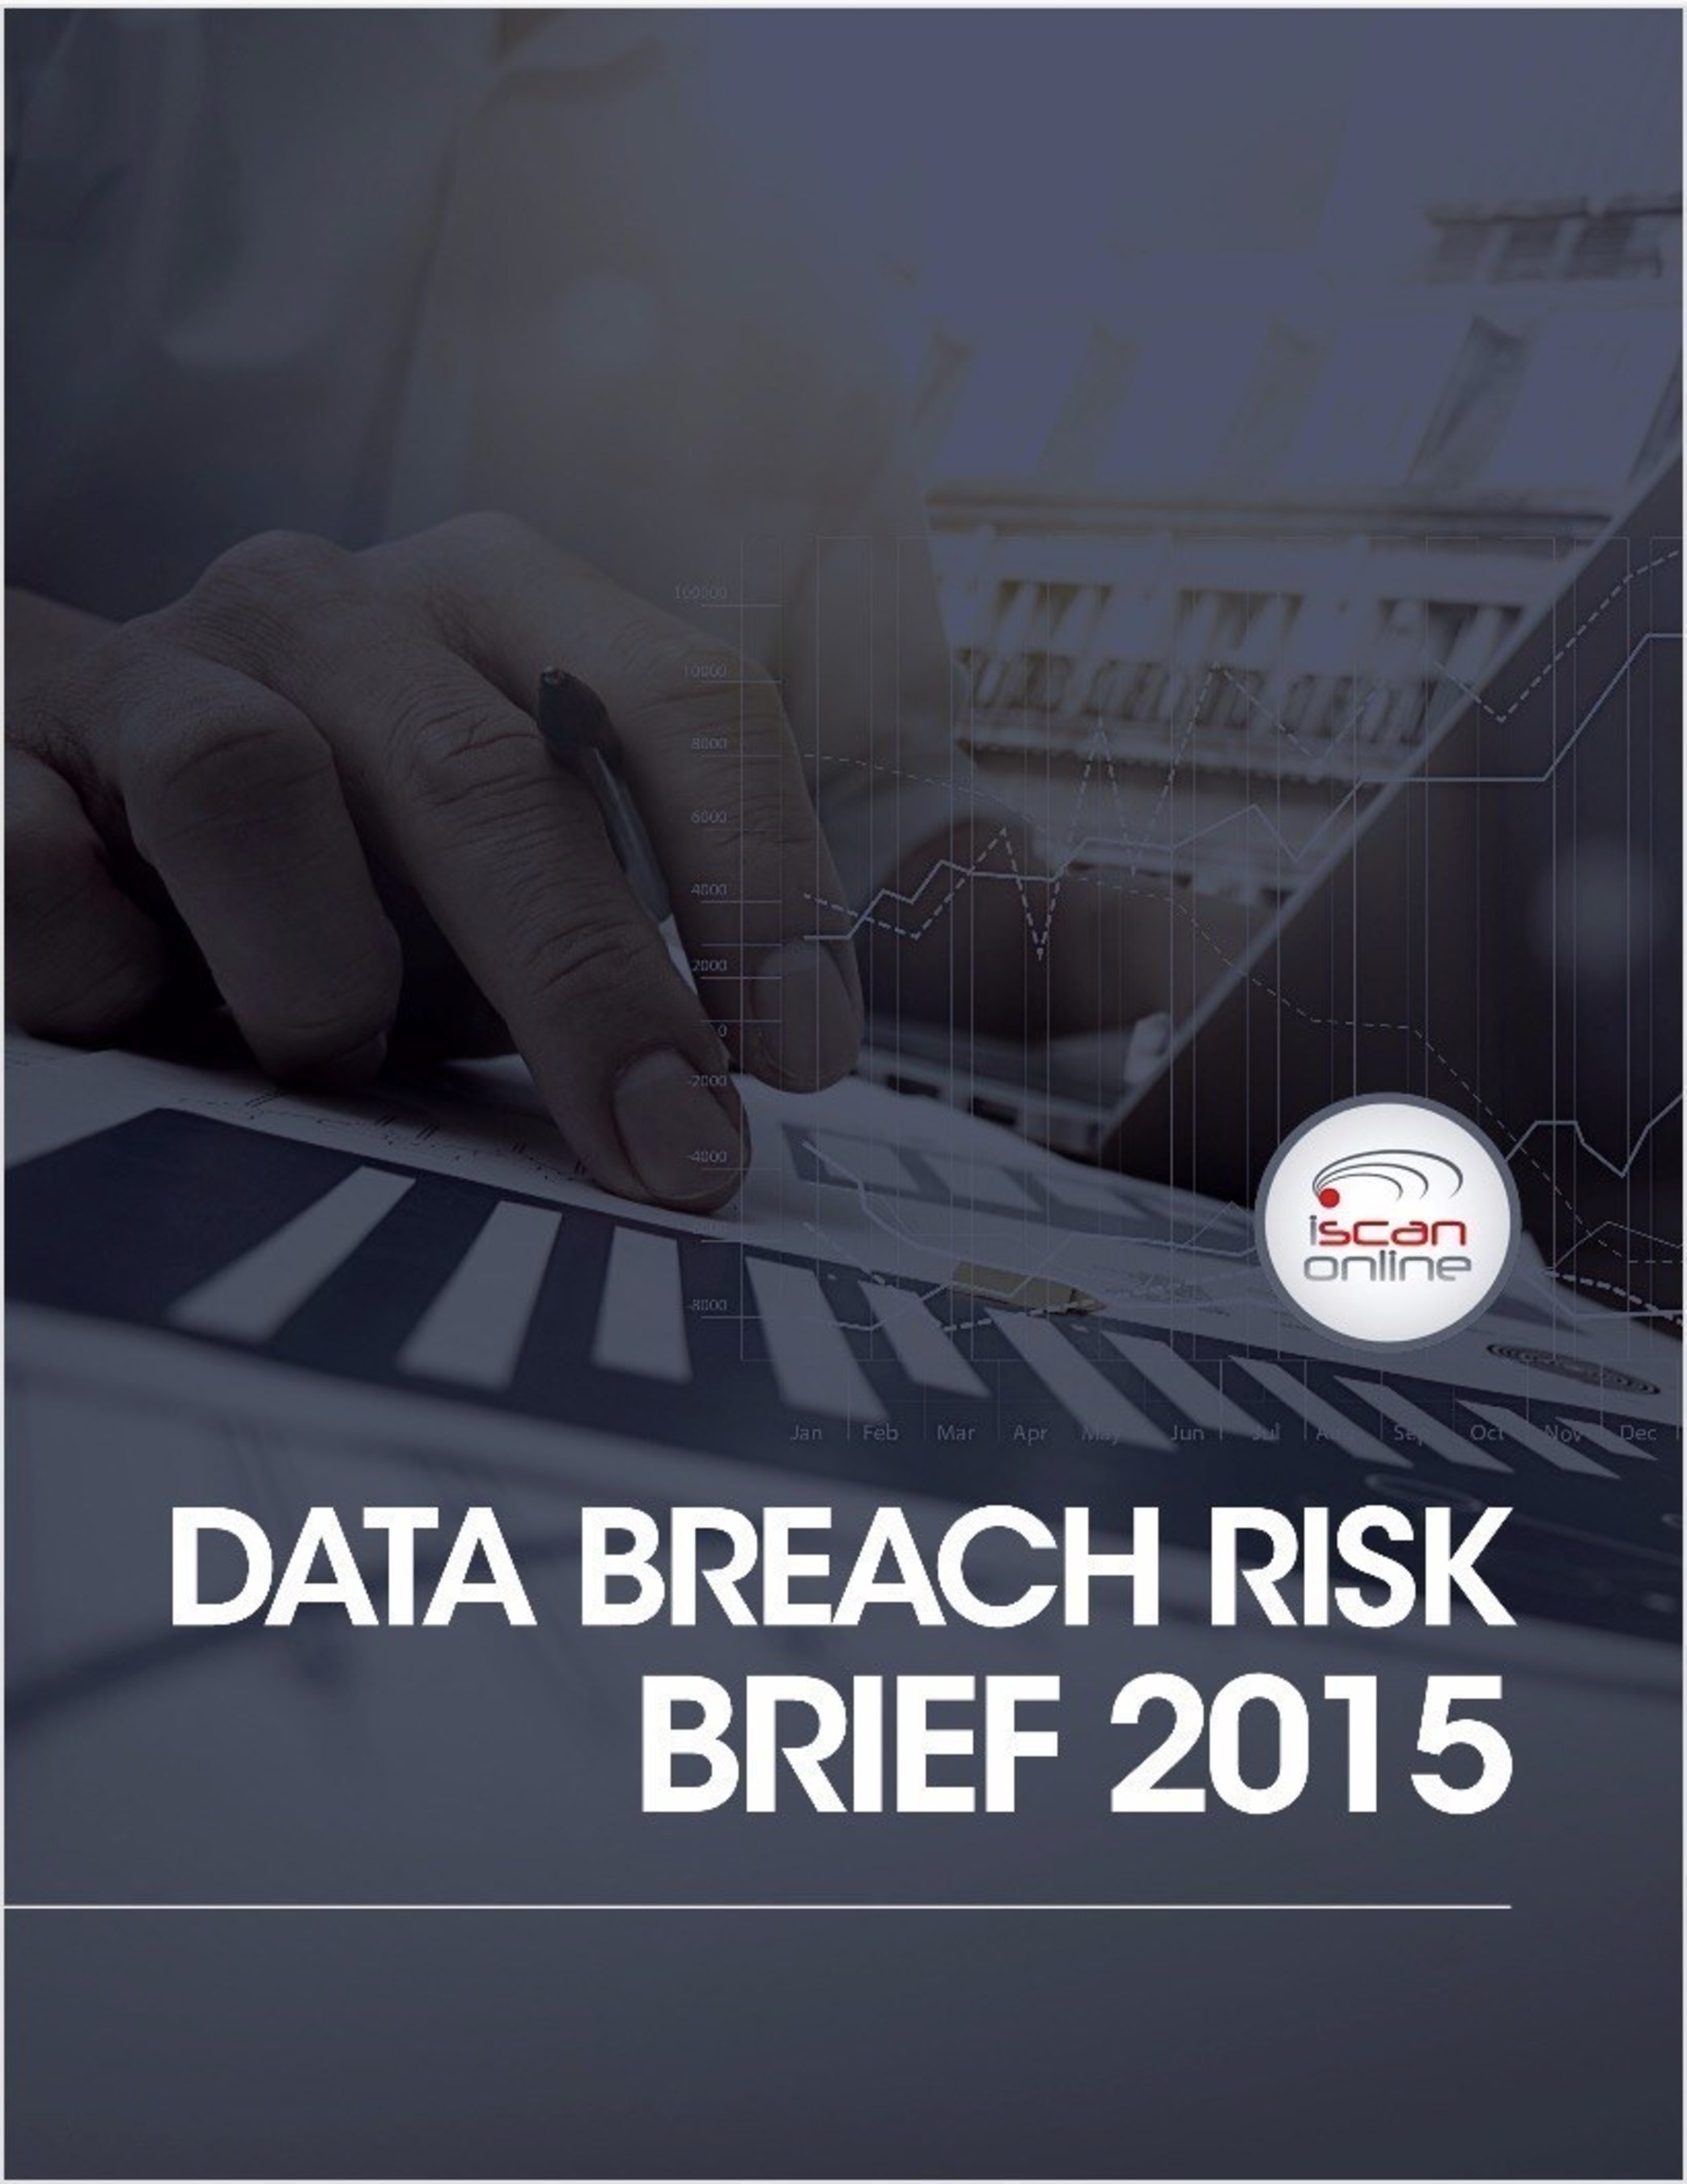 Download the Brief at http://http://events.iscanonline.com/ciso_brief